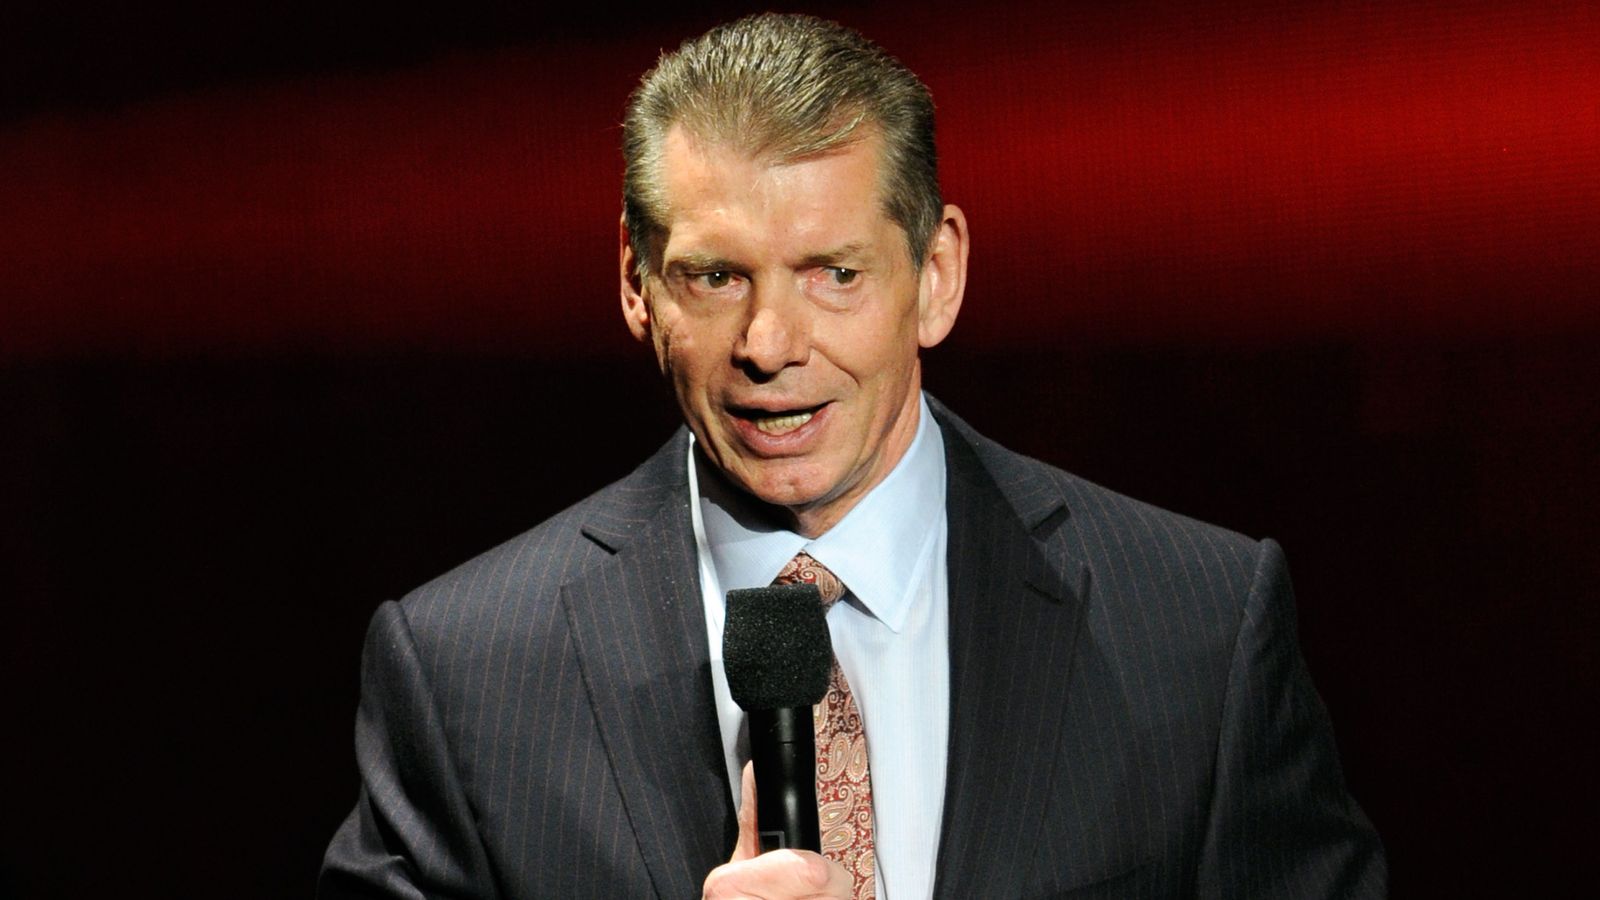 Vince McMahon steps back from WWE roles amid misconduct allegations | Daughter Stephanie named interim CEO